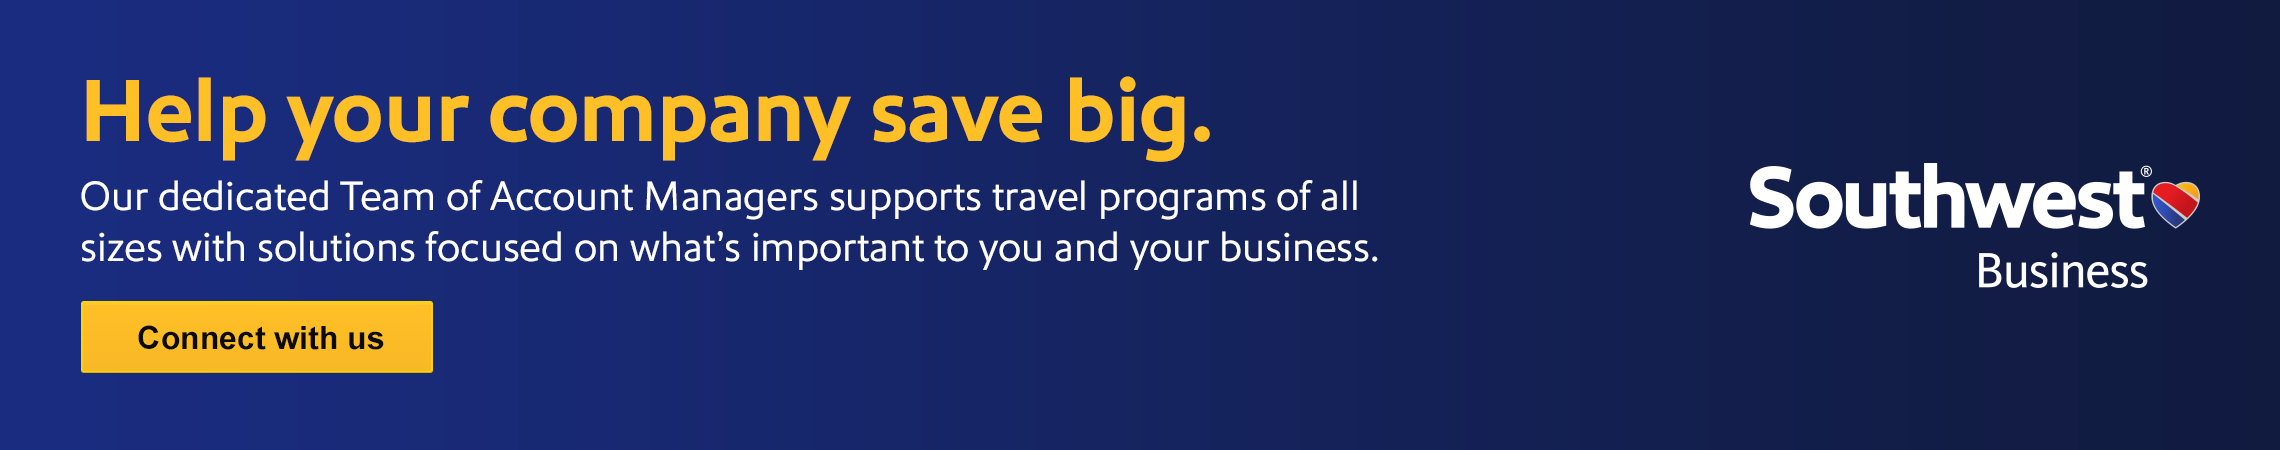 Help your company save big. Our dedicated Team of Account Managers supports travel programs of all sizes with solutions focused on what's important to you and your business.